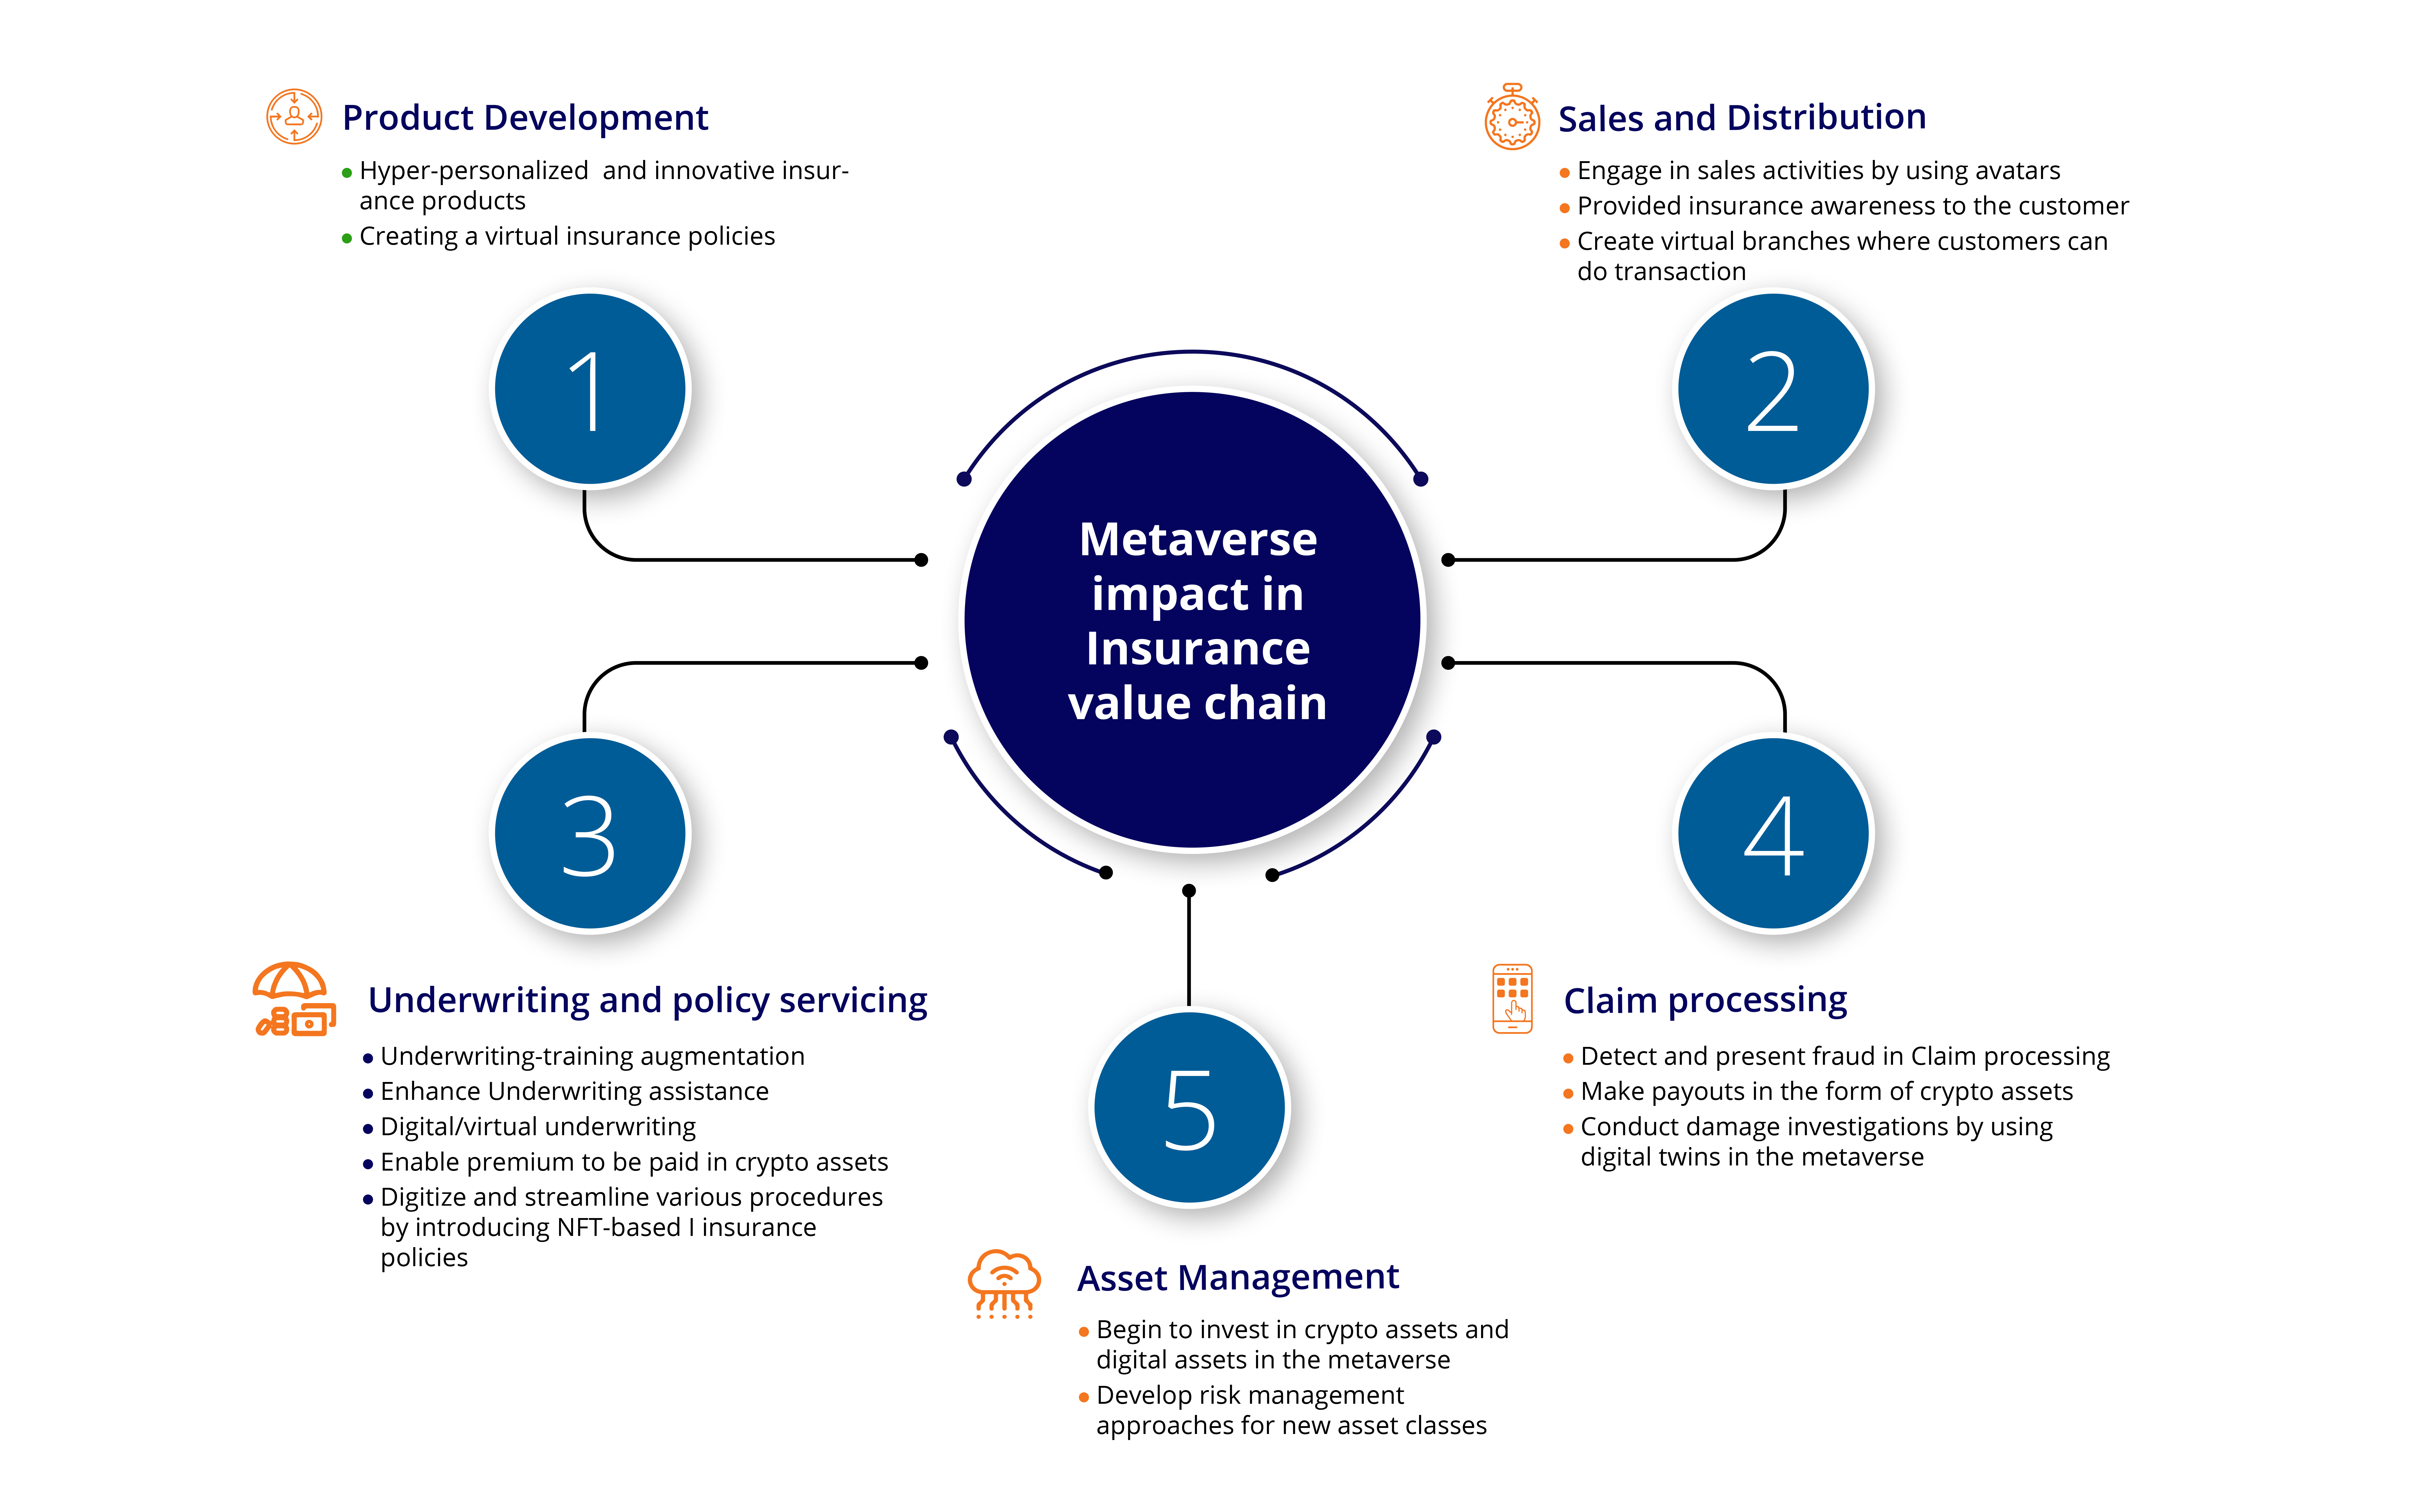 Metaverse’s Impact on the Insurance Value Chain